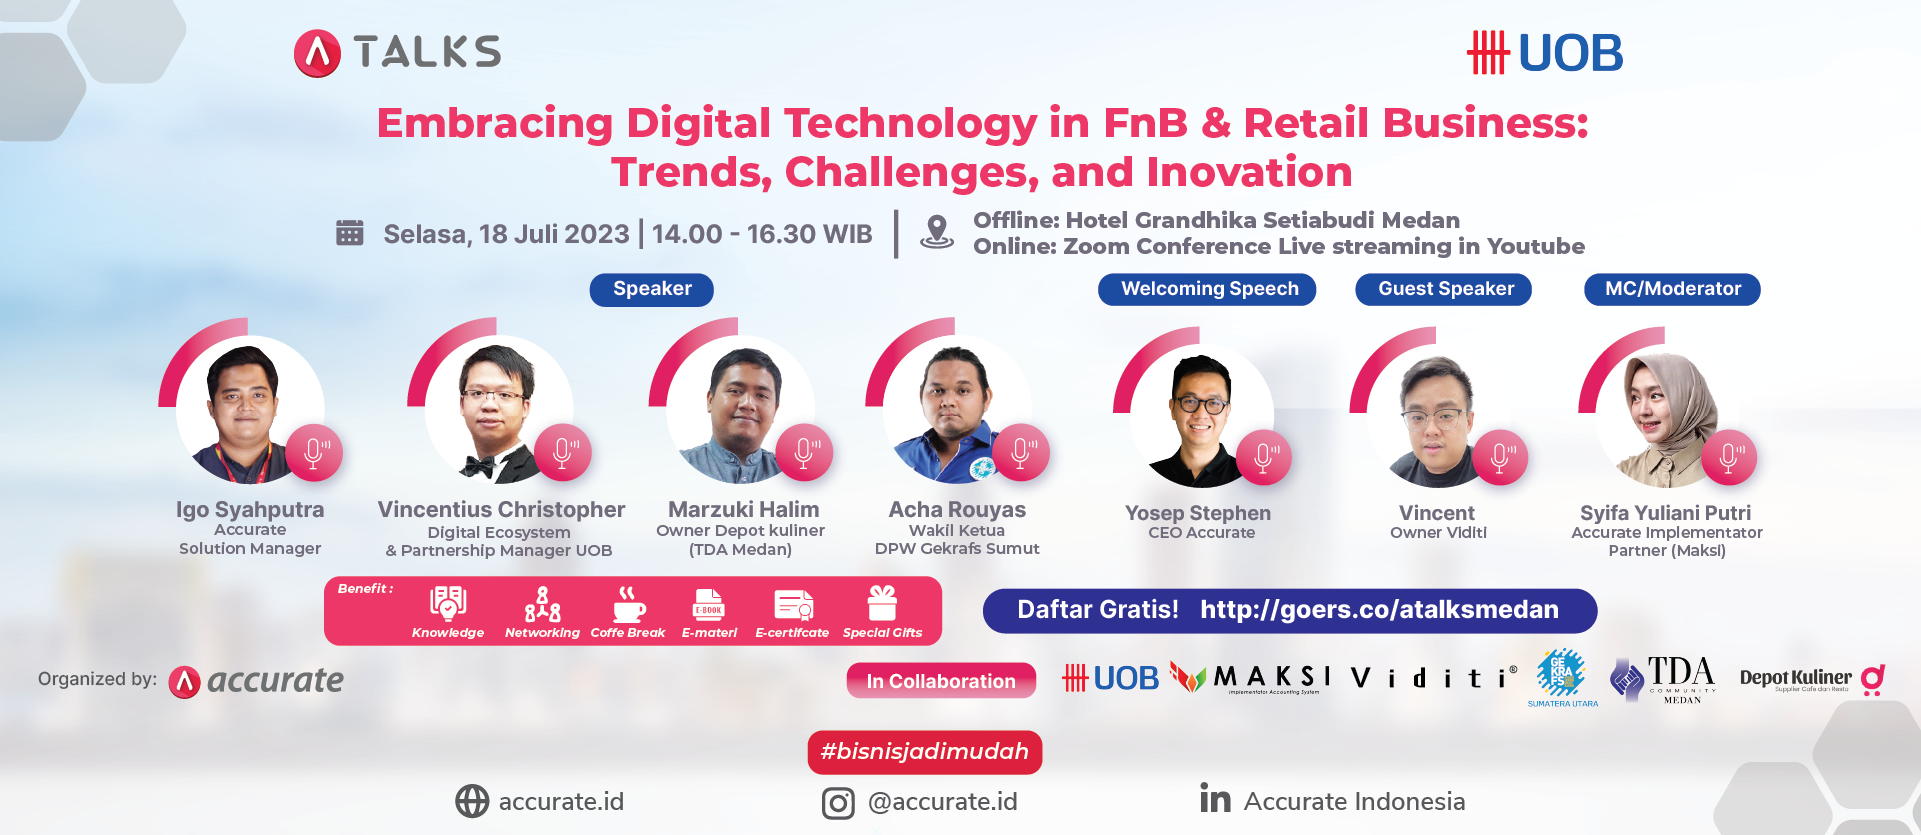 ATALKS Hybrid Medan ”Embracing Digital Technology in FnB & Retail Business: Trends, Challenges, and Innovation.”